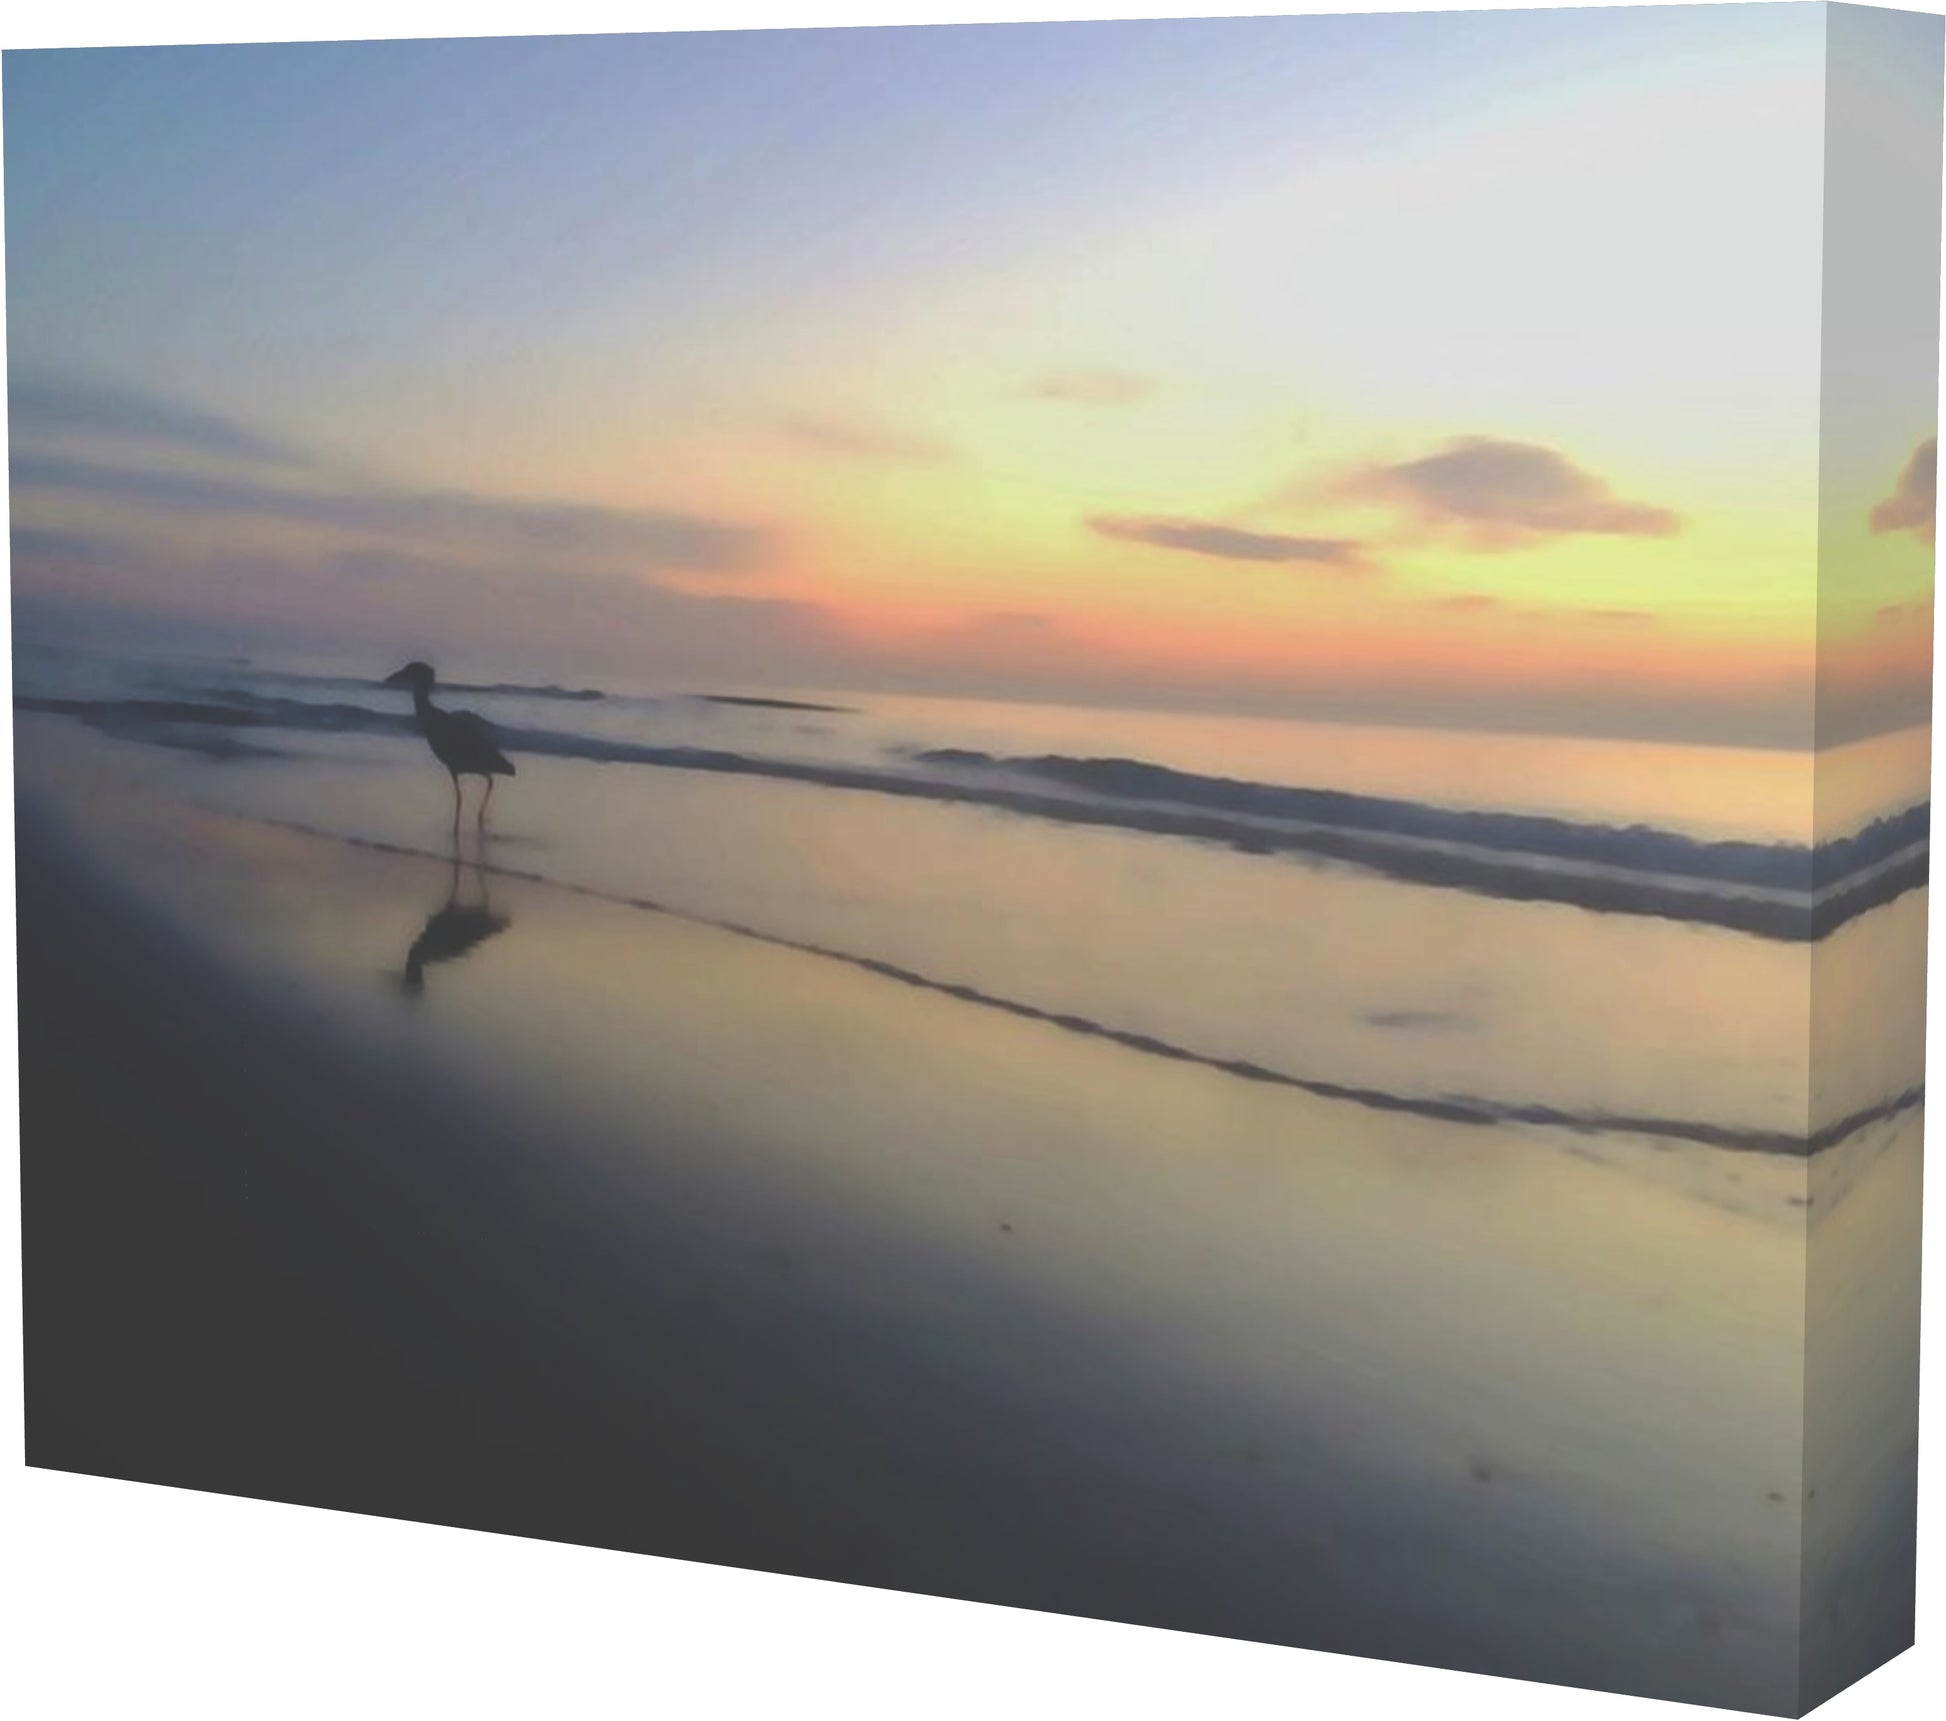 Egret enjoy morning at beach canvas Right side view print by Jacqueline mb designs 